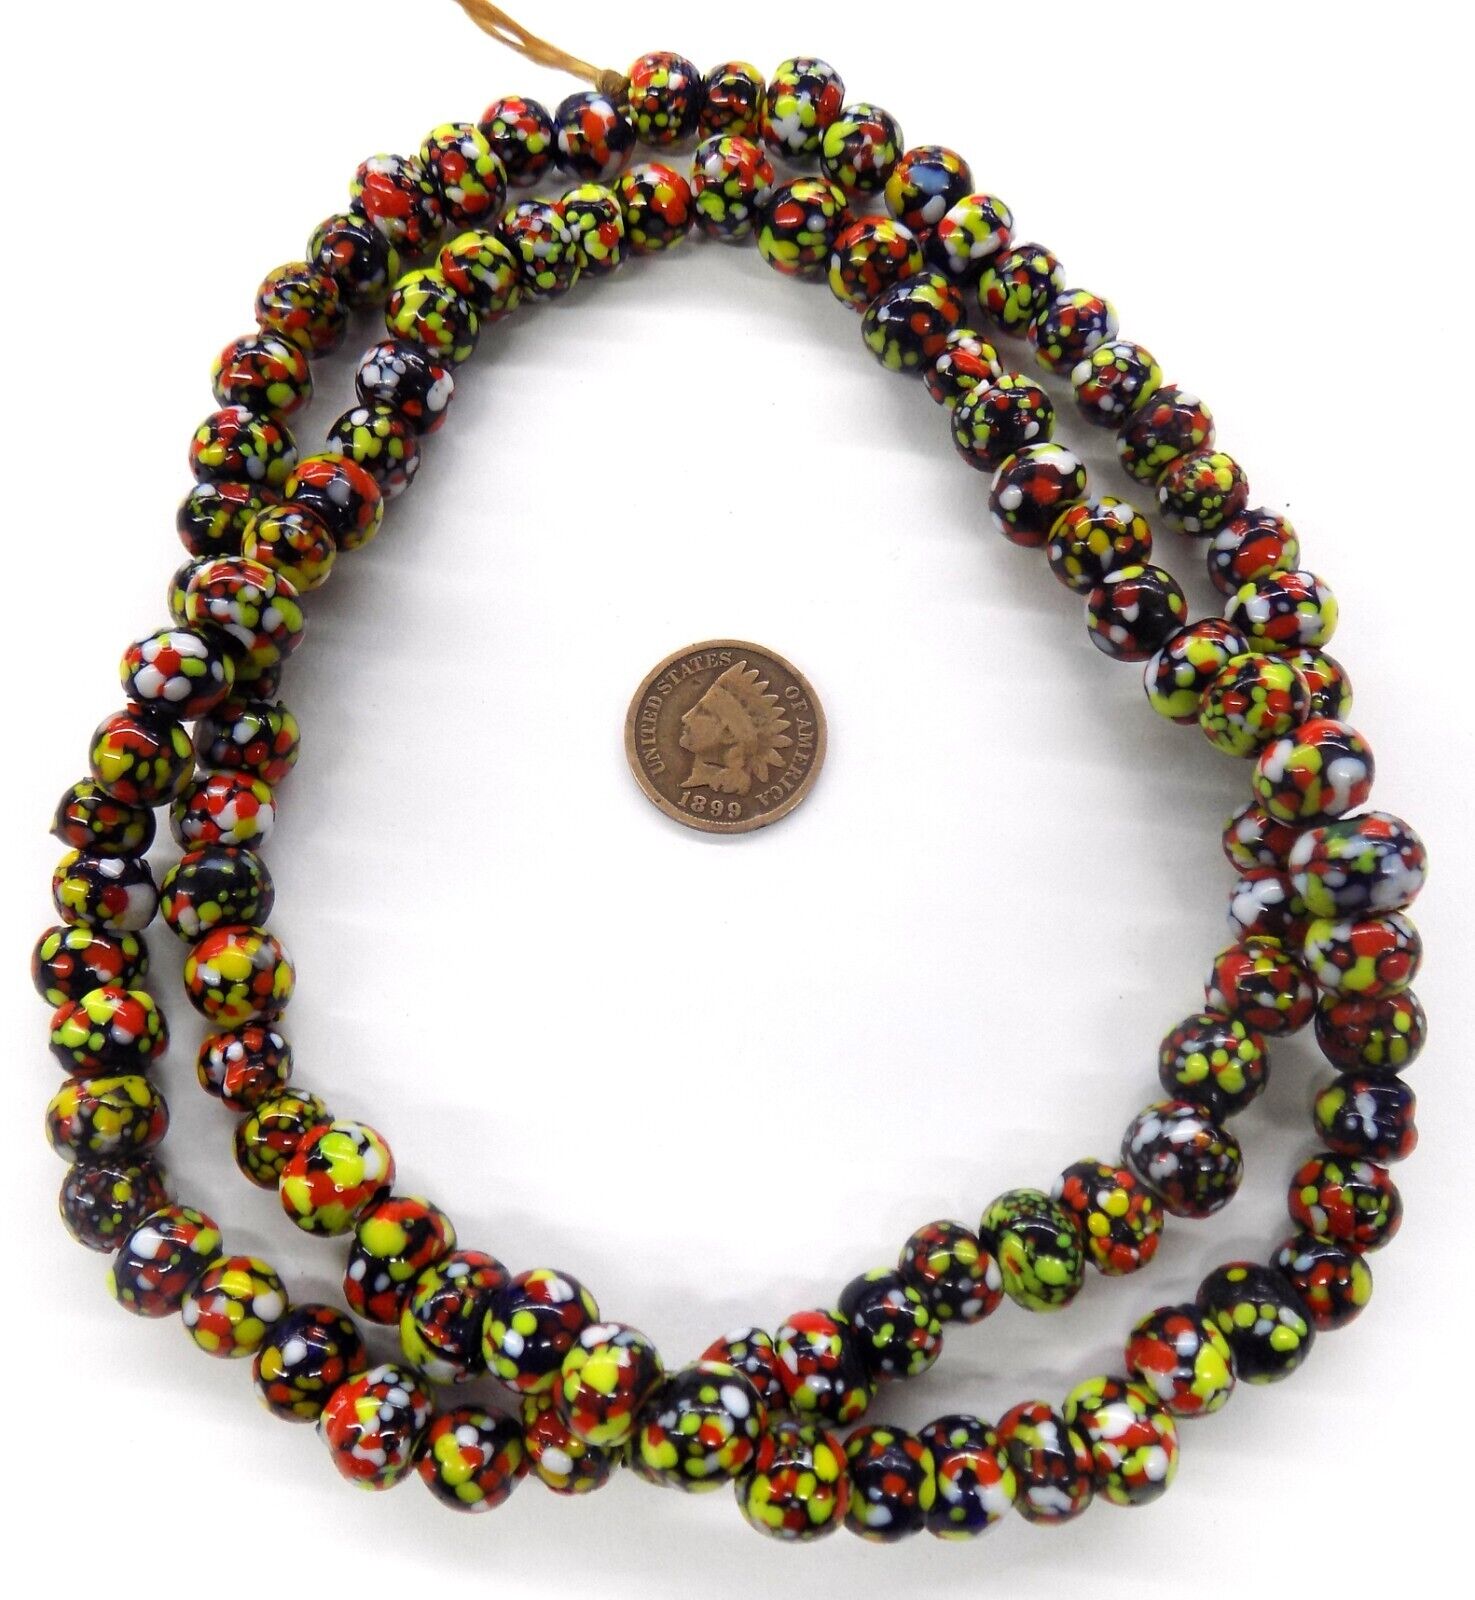 100 End of the Day Crumb Trade beads African Trade   Stock T62